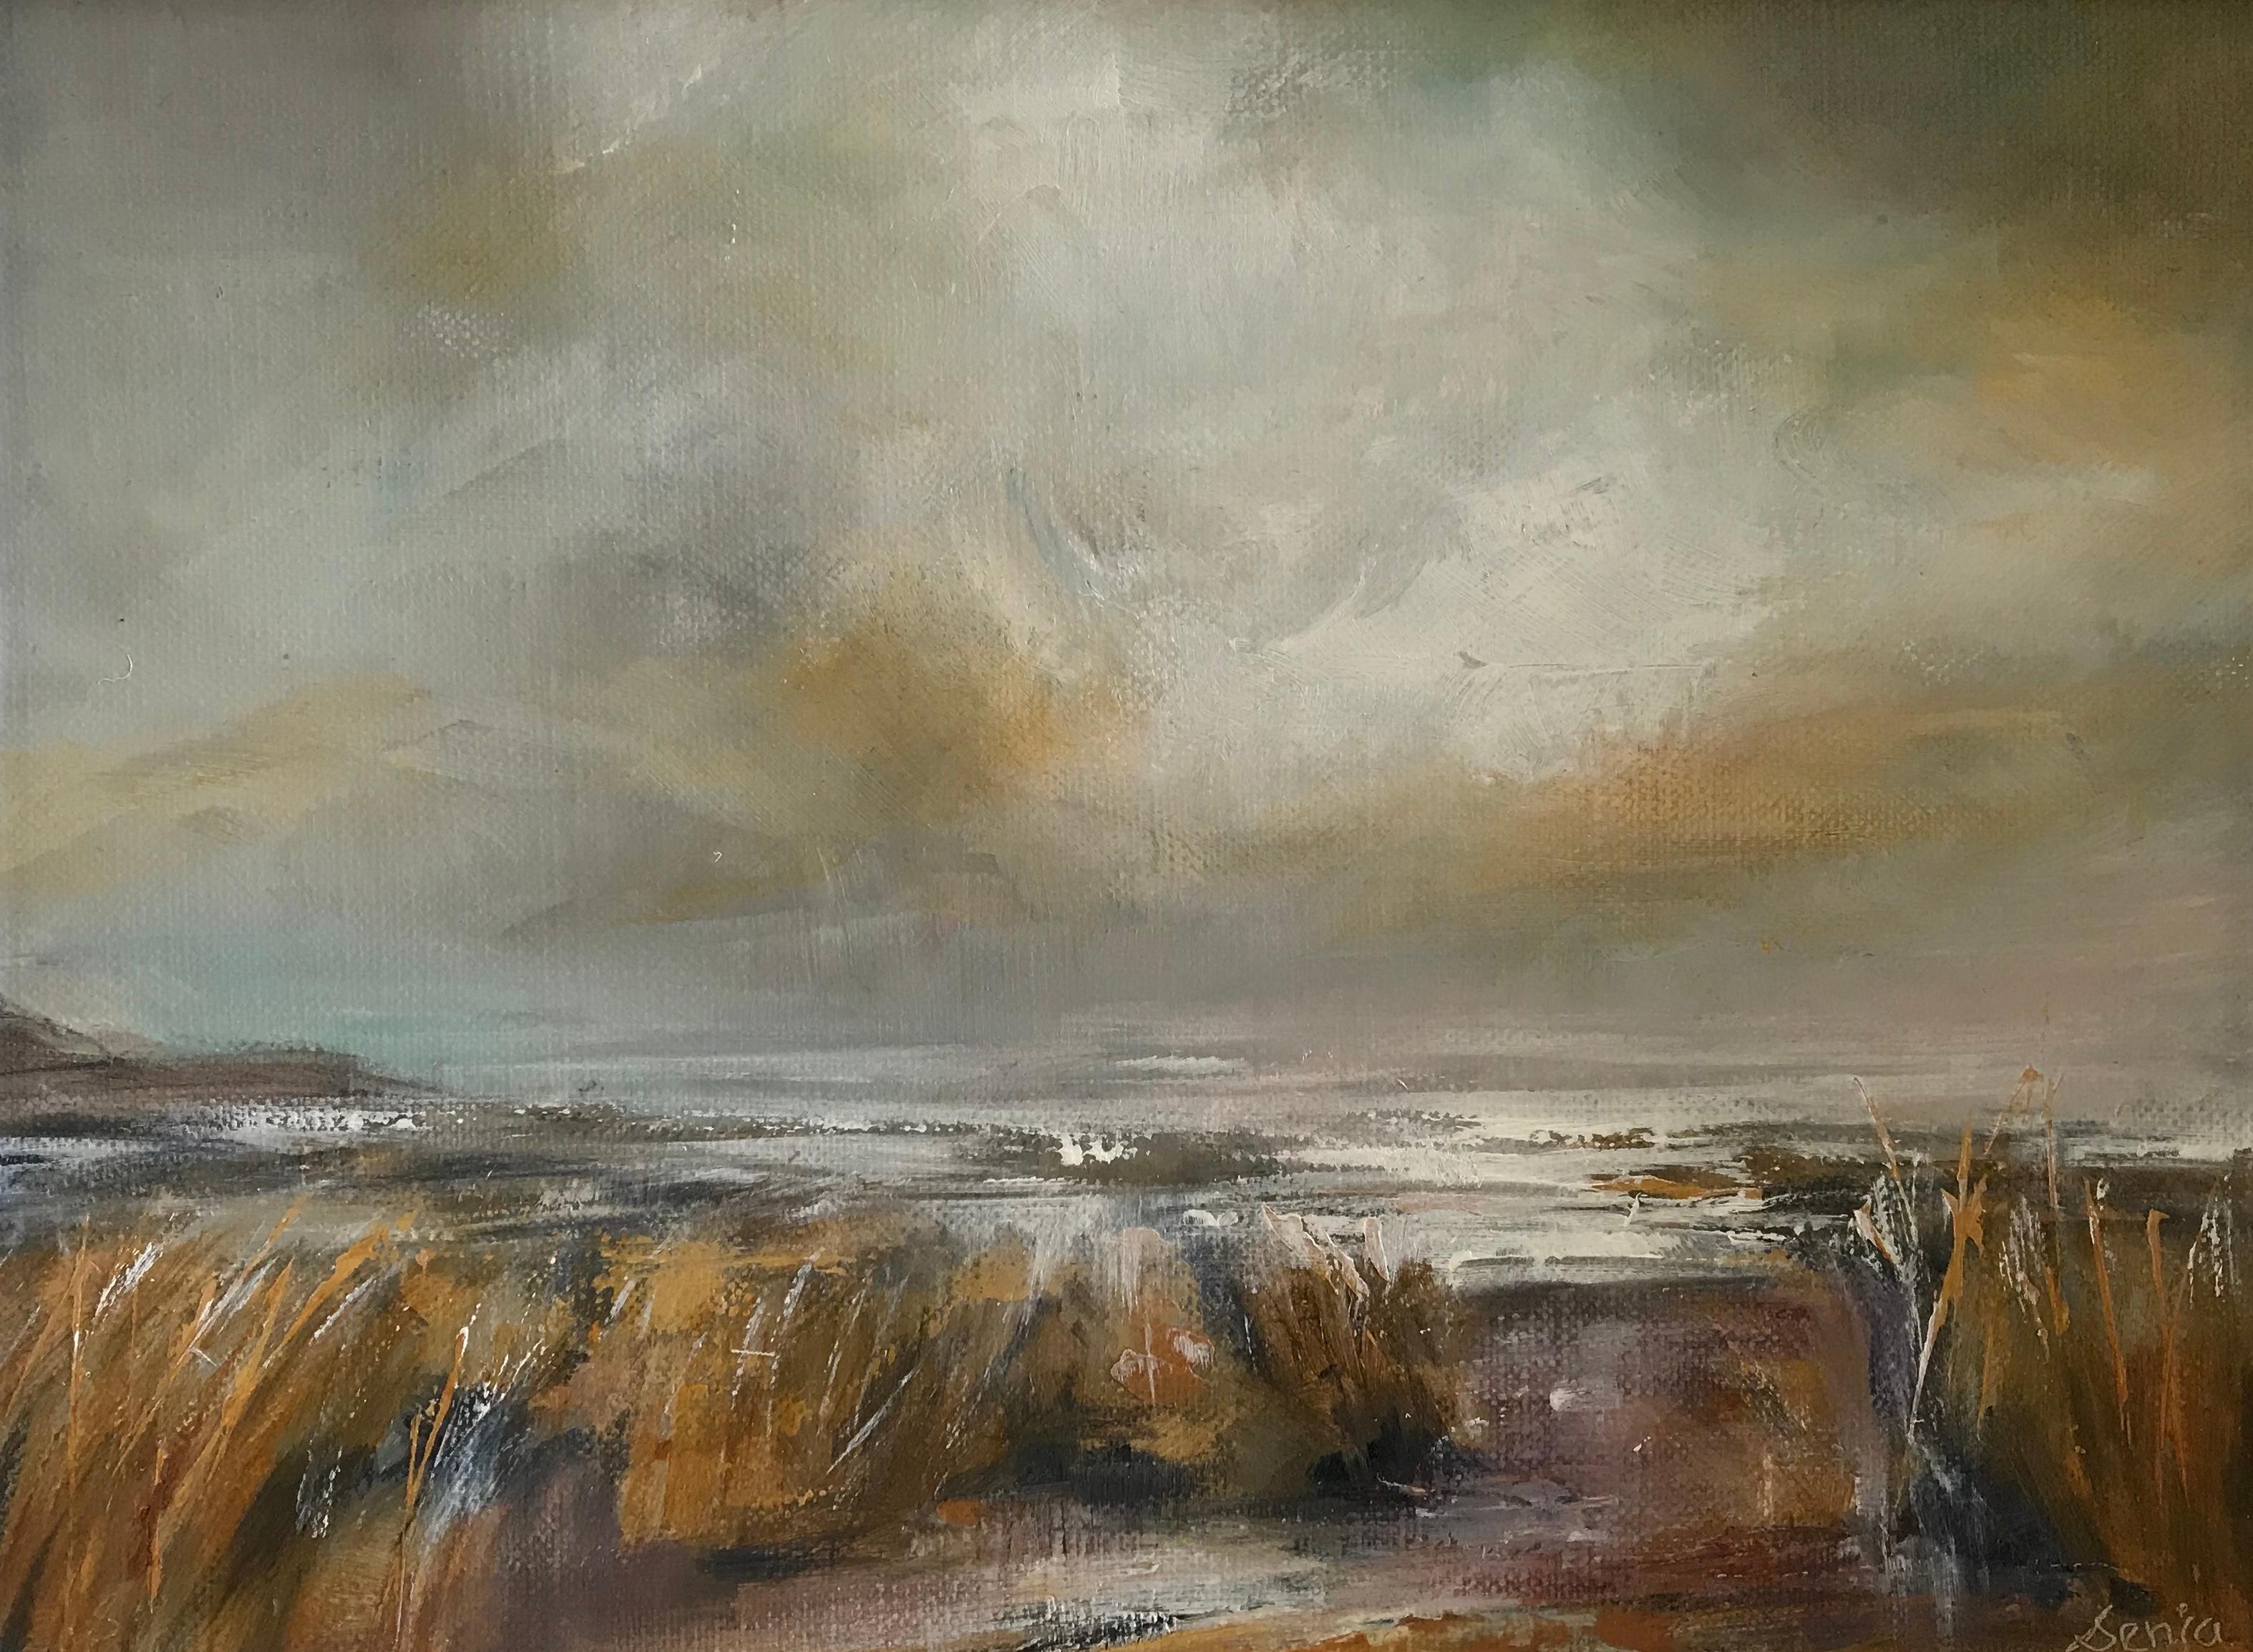 17 x 23cm - image size
35 x 29cm - frame size

Born in Pembrokeshire, Wales, in 1968, Senja Brendon began life by the sea, before moving to the Lake District to grow up surrounded by the breathtaking landscape. Daughter to the outdoor adventure